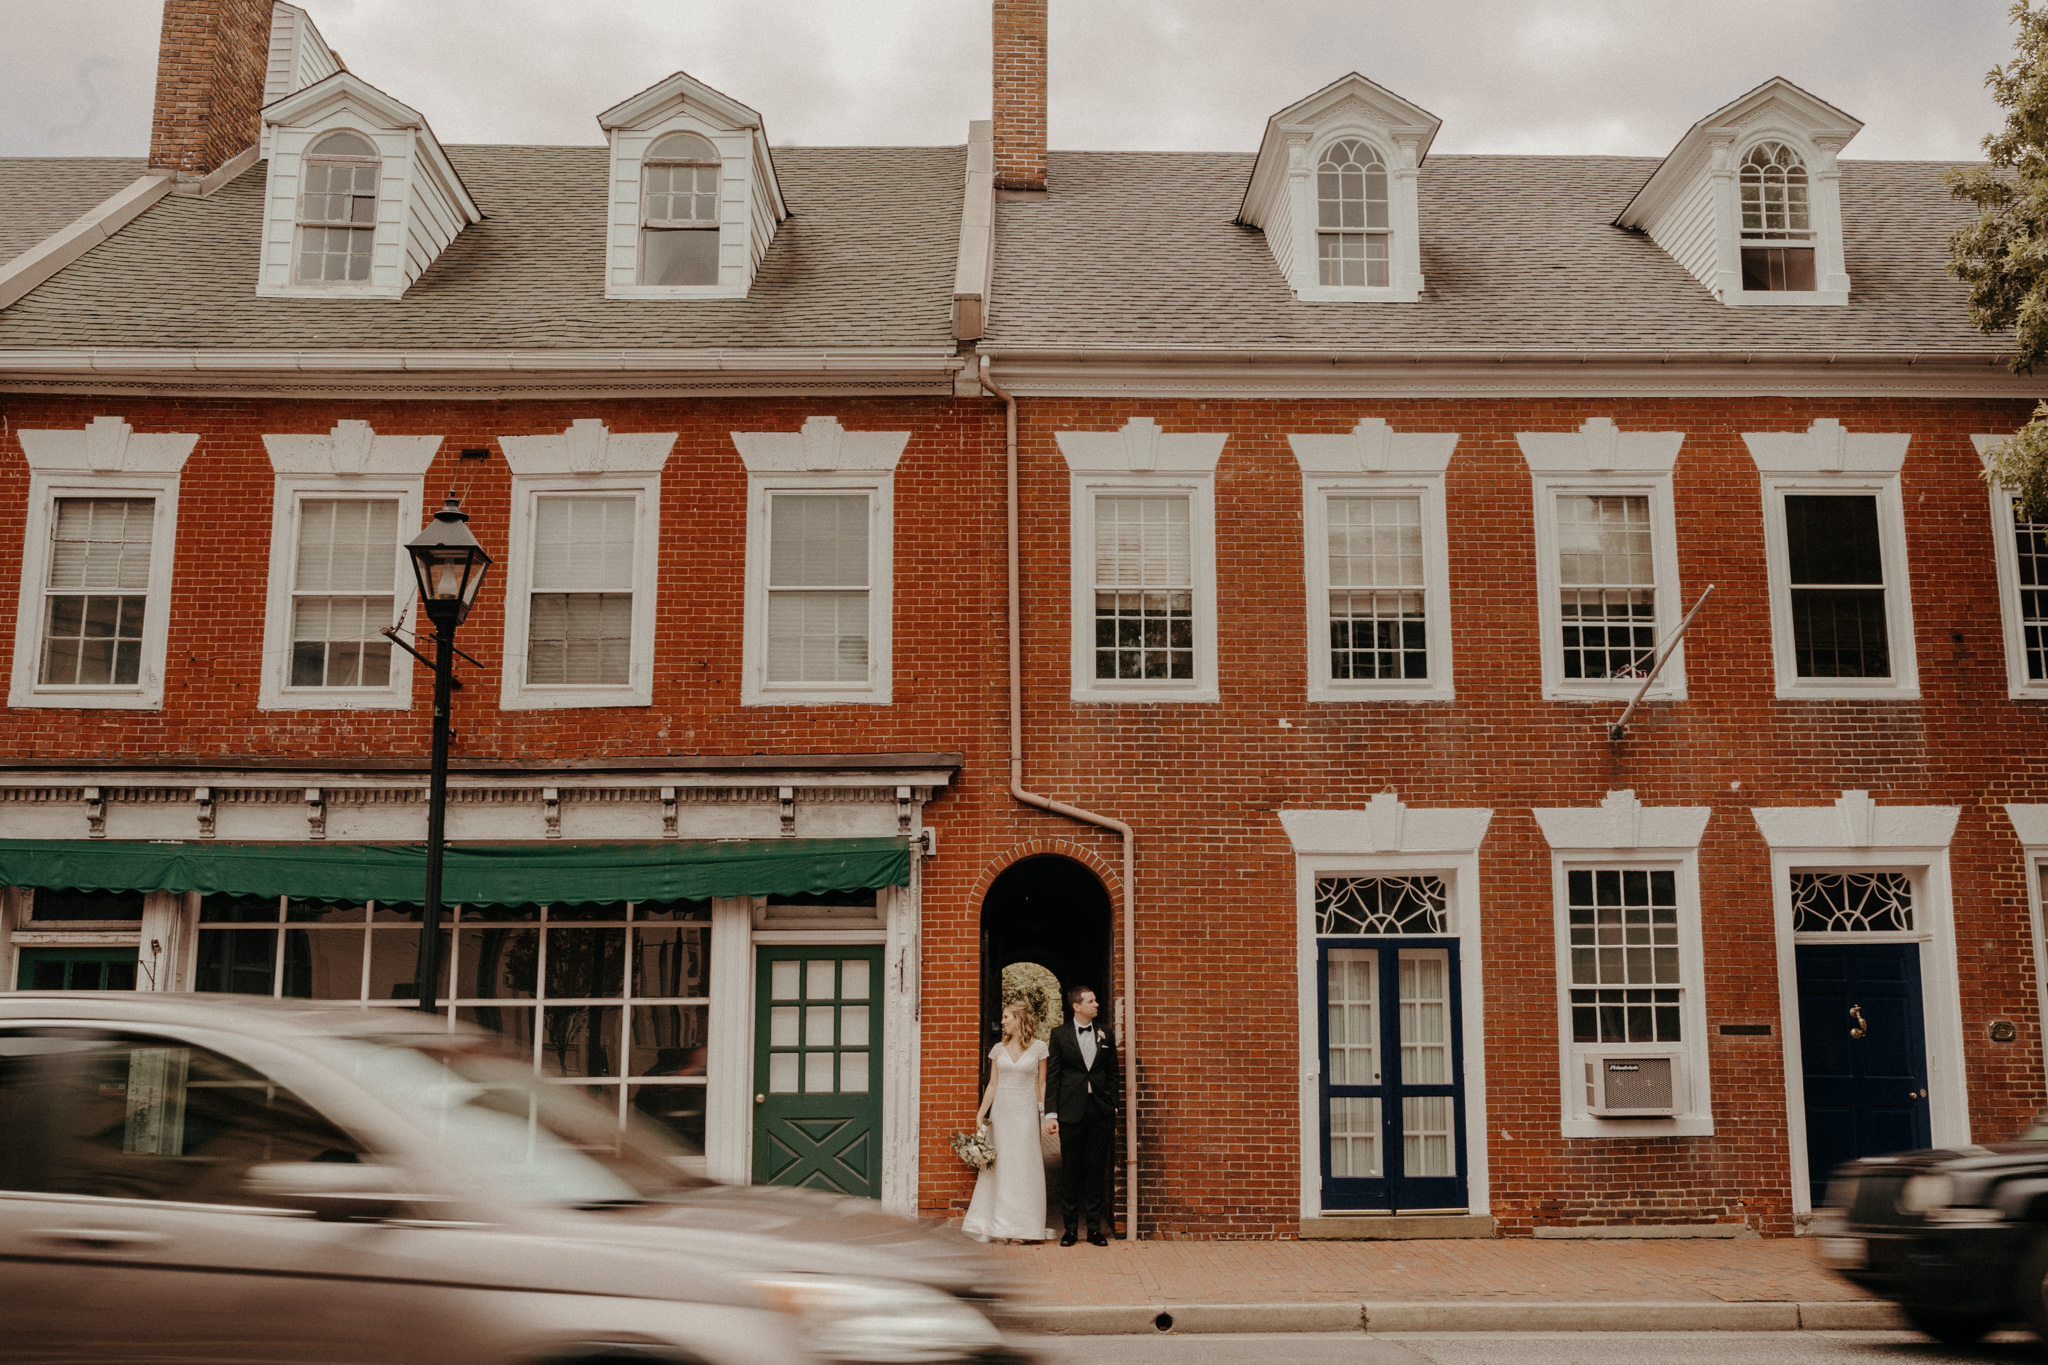 Fun & relaxed garden wedding at the Tidewater Inn, a beautiful venue on Maryland’s eastern shore. Images by destination elopement photographer Victoria Selman